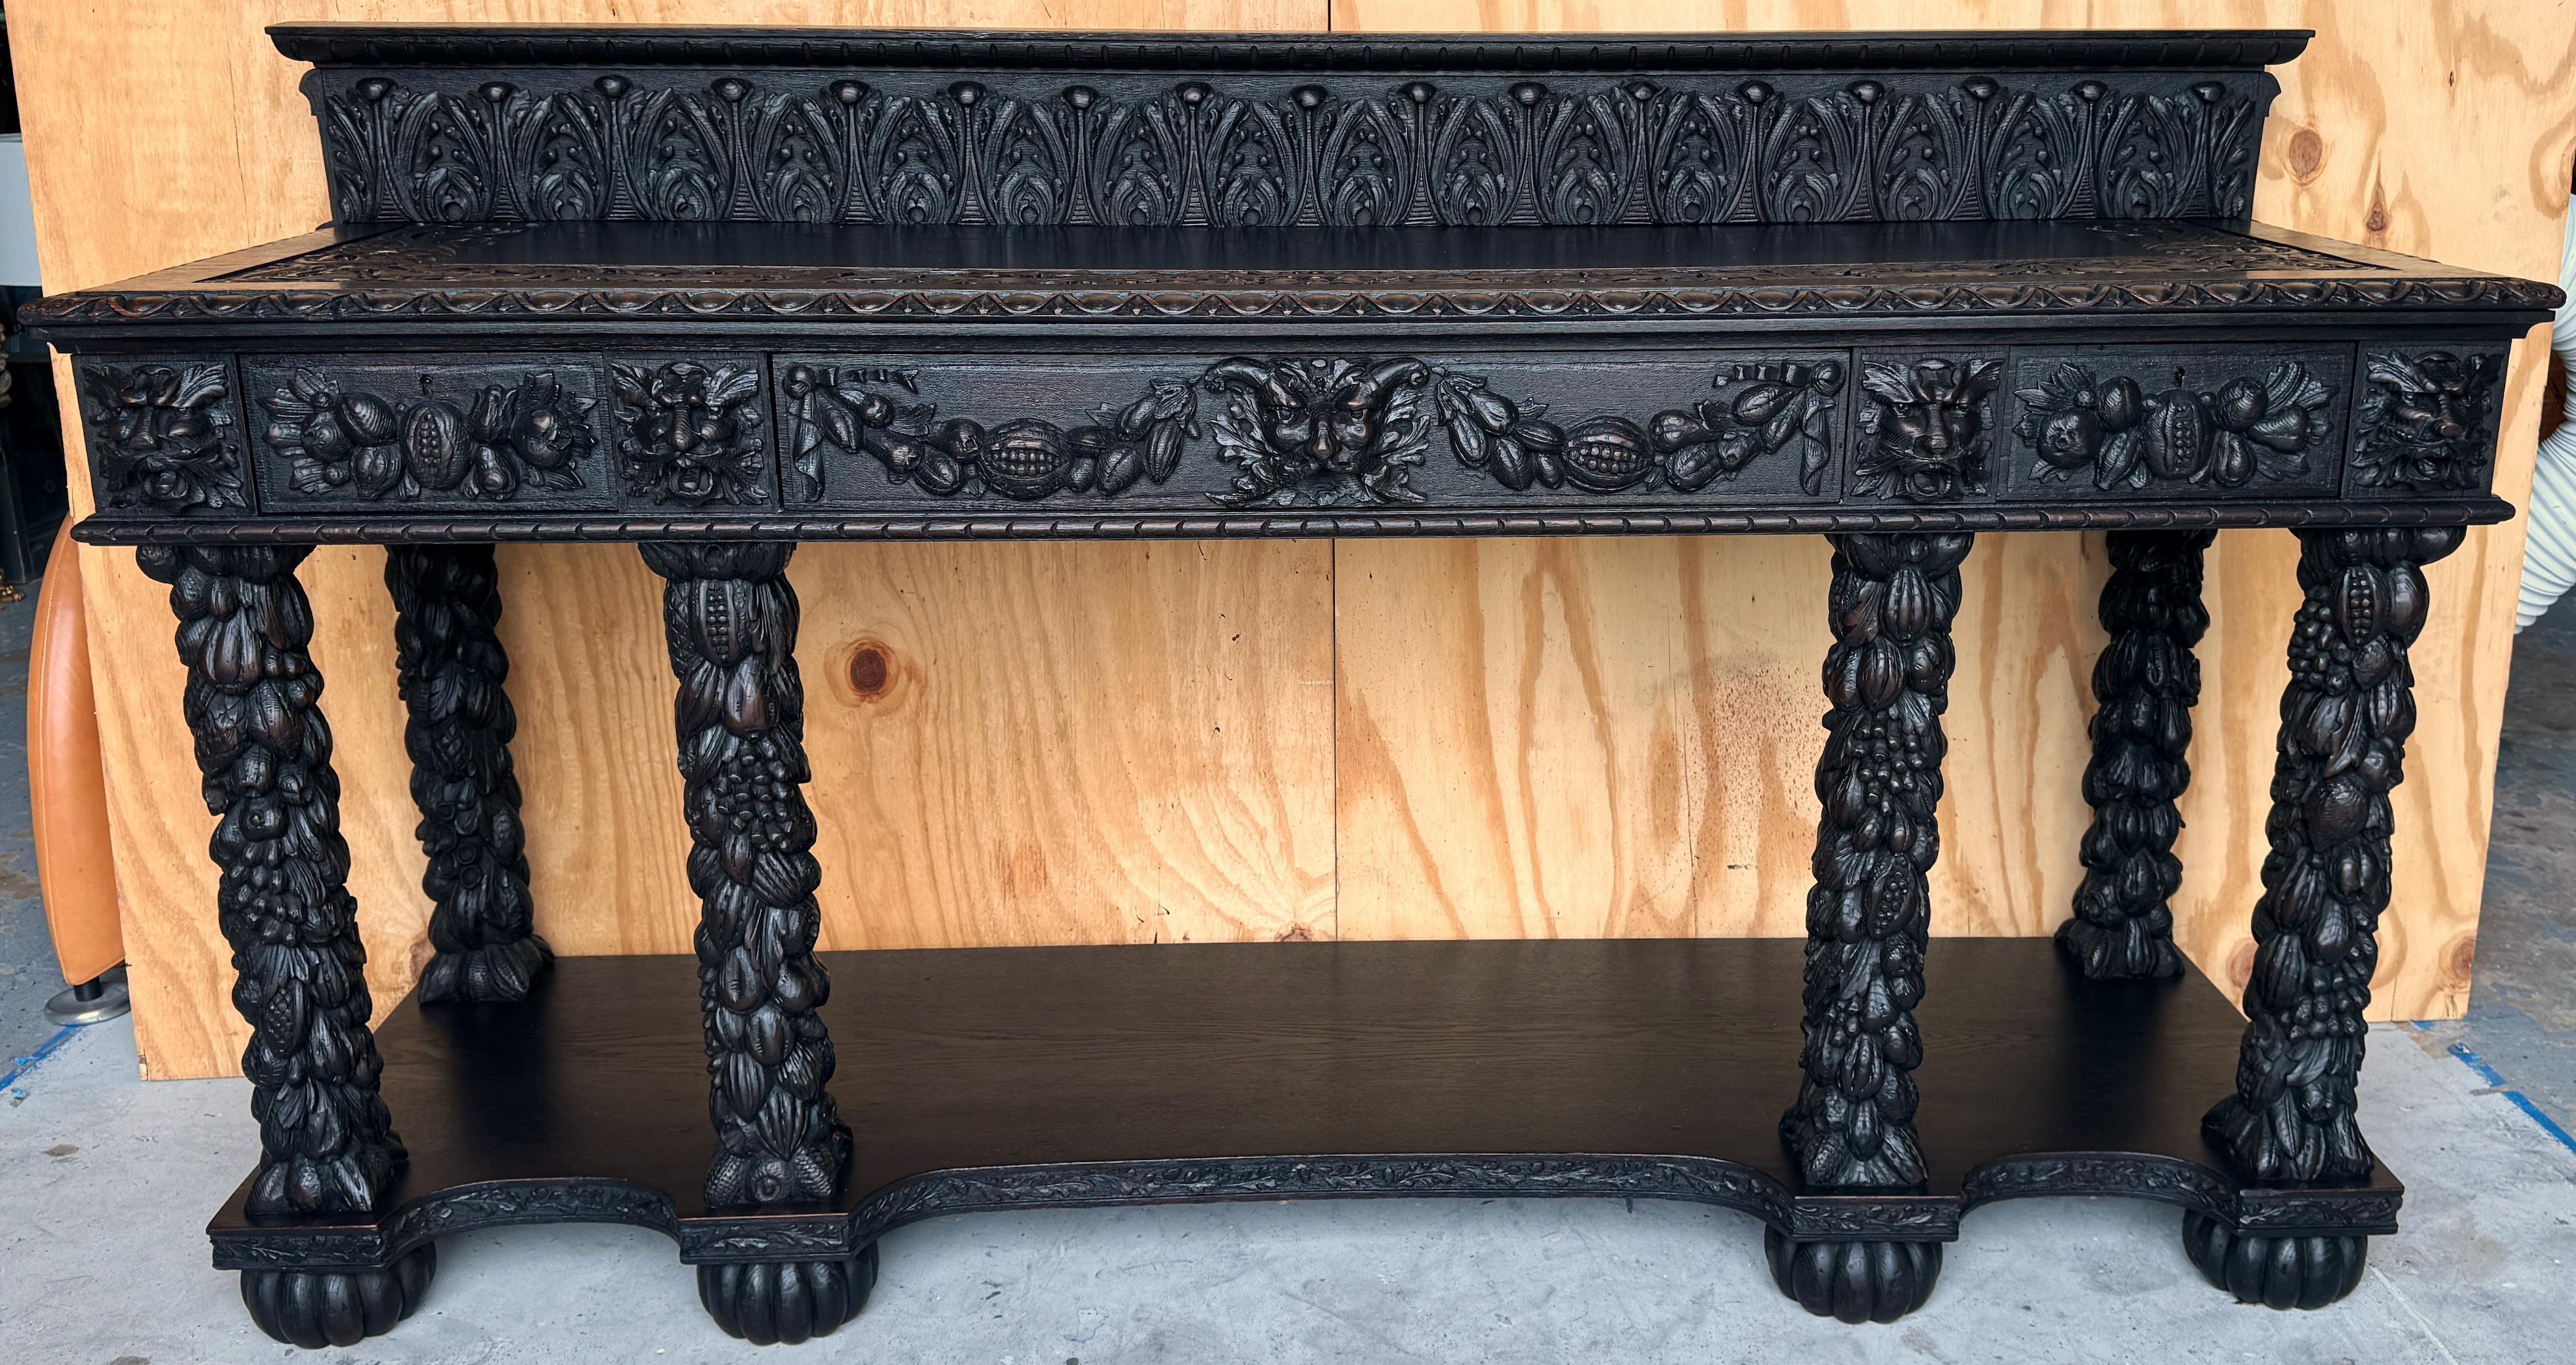 19th Century Italian Baroque/FFlorentine Carved Blackened Oak Hunt/Sideboard 

An exquisite 19th-century Italian Baroque/Florentine carved blackened oak hunt/sideboard is a masterwork of craftsmanship and design. With dimensions of 70 inches in